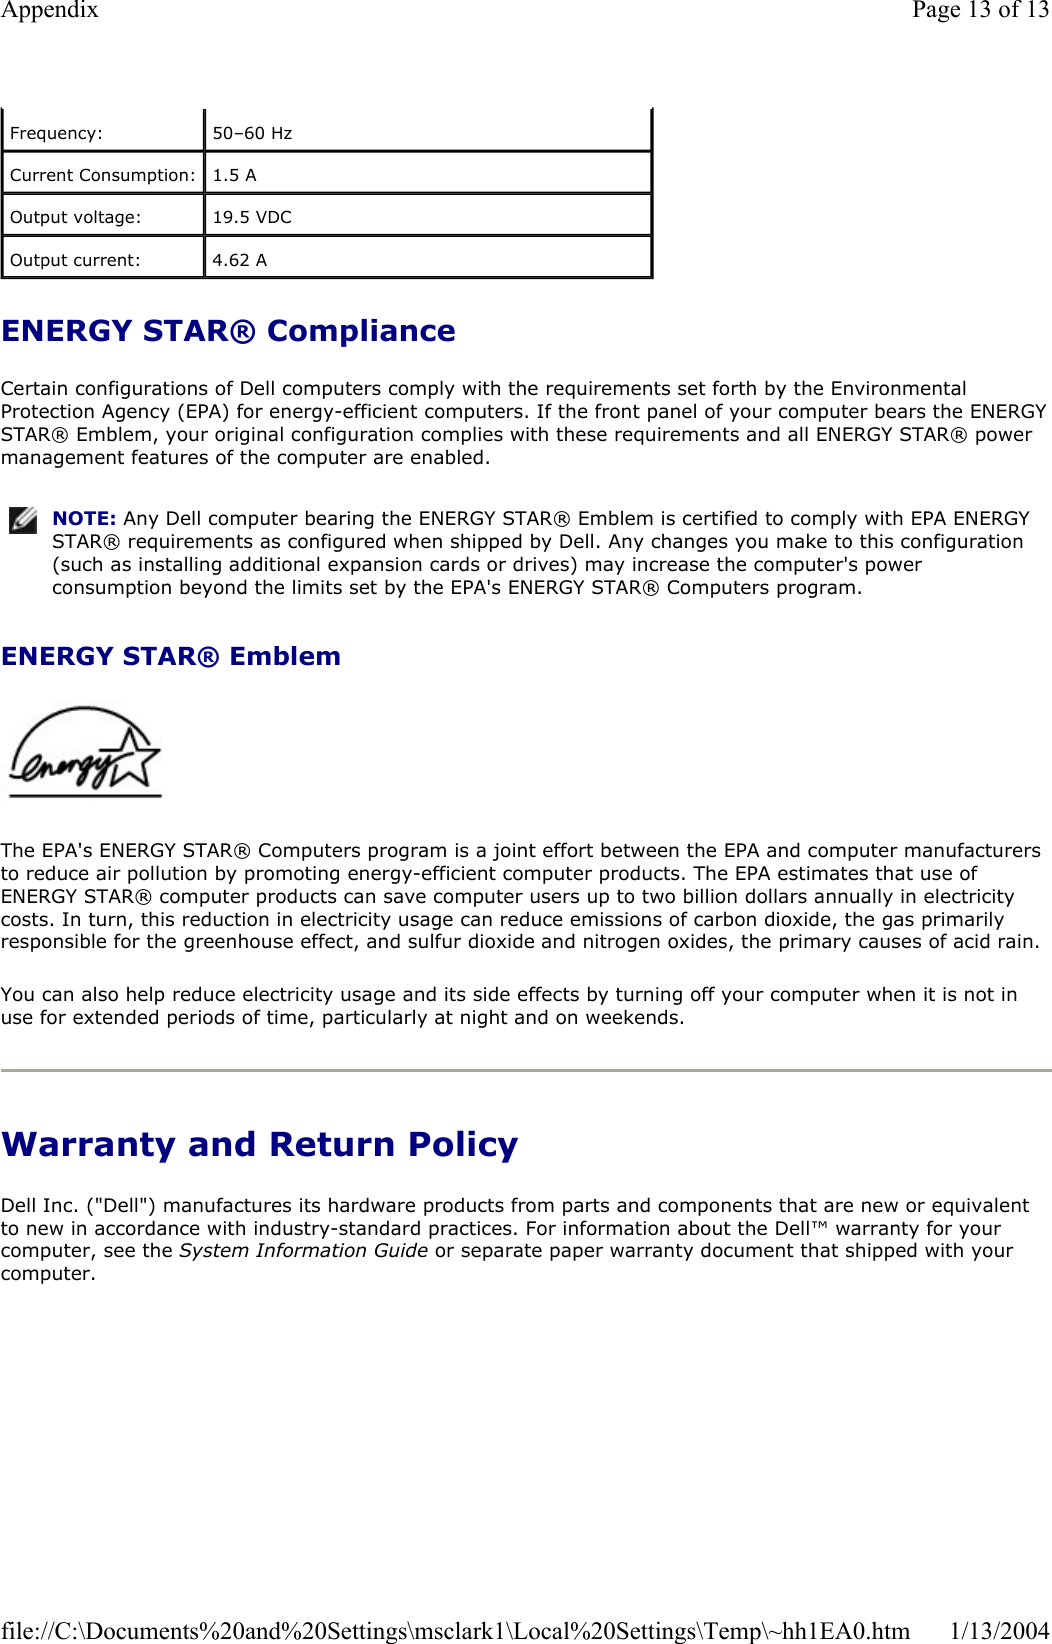 ENERGY STAR® Compliance Certain configurations of Dell computers comply with the requirements set forth by the Environmental Protection Agency (EPA) for energy-efficient computers. If the front panel of your computer bears the ENERGYSTAR® Emblem, your original configuration complies with these requirements and all ENERGY STAR® power management features of the computer are enabled. ENERGY STAR® Emblem  The EPA&apos;s ENERGY STAR® Computers program is a joint effort between the EPA and computer manufacturers to reduce air pollution by promoting energy-efficient computer products. The EPA estimates that use of ENERGY STAR® computer products can save computer users up to two billion dollars annually in electricity costs. In turn, this reduction in electricity usage can reduce emissions of carbon dioxide, the gas primarily responsible for the greenhouse effect, and sulfur dioxide and nitrogen oxides, the primary causes of acid rain. You can also help reduce electricity usage and its side effects by turning off your computer when it is not in use for extended periods of time, particularly at night and on weekends. Warranty and Return Policy Dell Inc. (&quot;Dell&quot;) manufactures its hardware products from parts and components that are new or equivalent to new in accordance with industry-standard practices. For information about the Dell™ warranty for your computer, see the System Information Guide or separate paper warranty document that shipped with your computer. Frequency:  50–60 Hz Current Consumption:  1.5 A Output voltage:  19.5 VDC Output current:  4.62 A NOTE: Any Dell computer bearing the ENERGY STAR® Emblem is certified to comply with EPA ENERGY STAR® requirements as configured when shipped by Dell. Any changes you make to this configuration (such as installing additional expansion cards or drives) may increase the computer&apos;s power consumption beyond the limits set by the EPA&apos;s ENERGY STAR® Computers program.Page 13 of 13Appendix1/13/2004file://C:\Documents%20and%20Settings\msclark1\Local%20Settings\Temp\~hh1EA0.htm